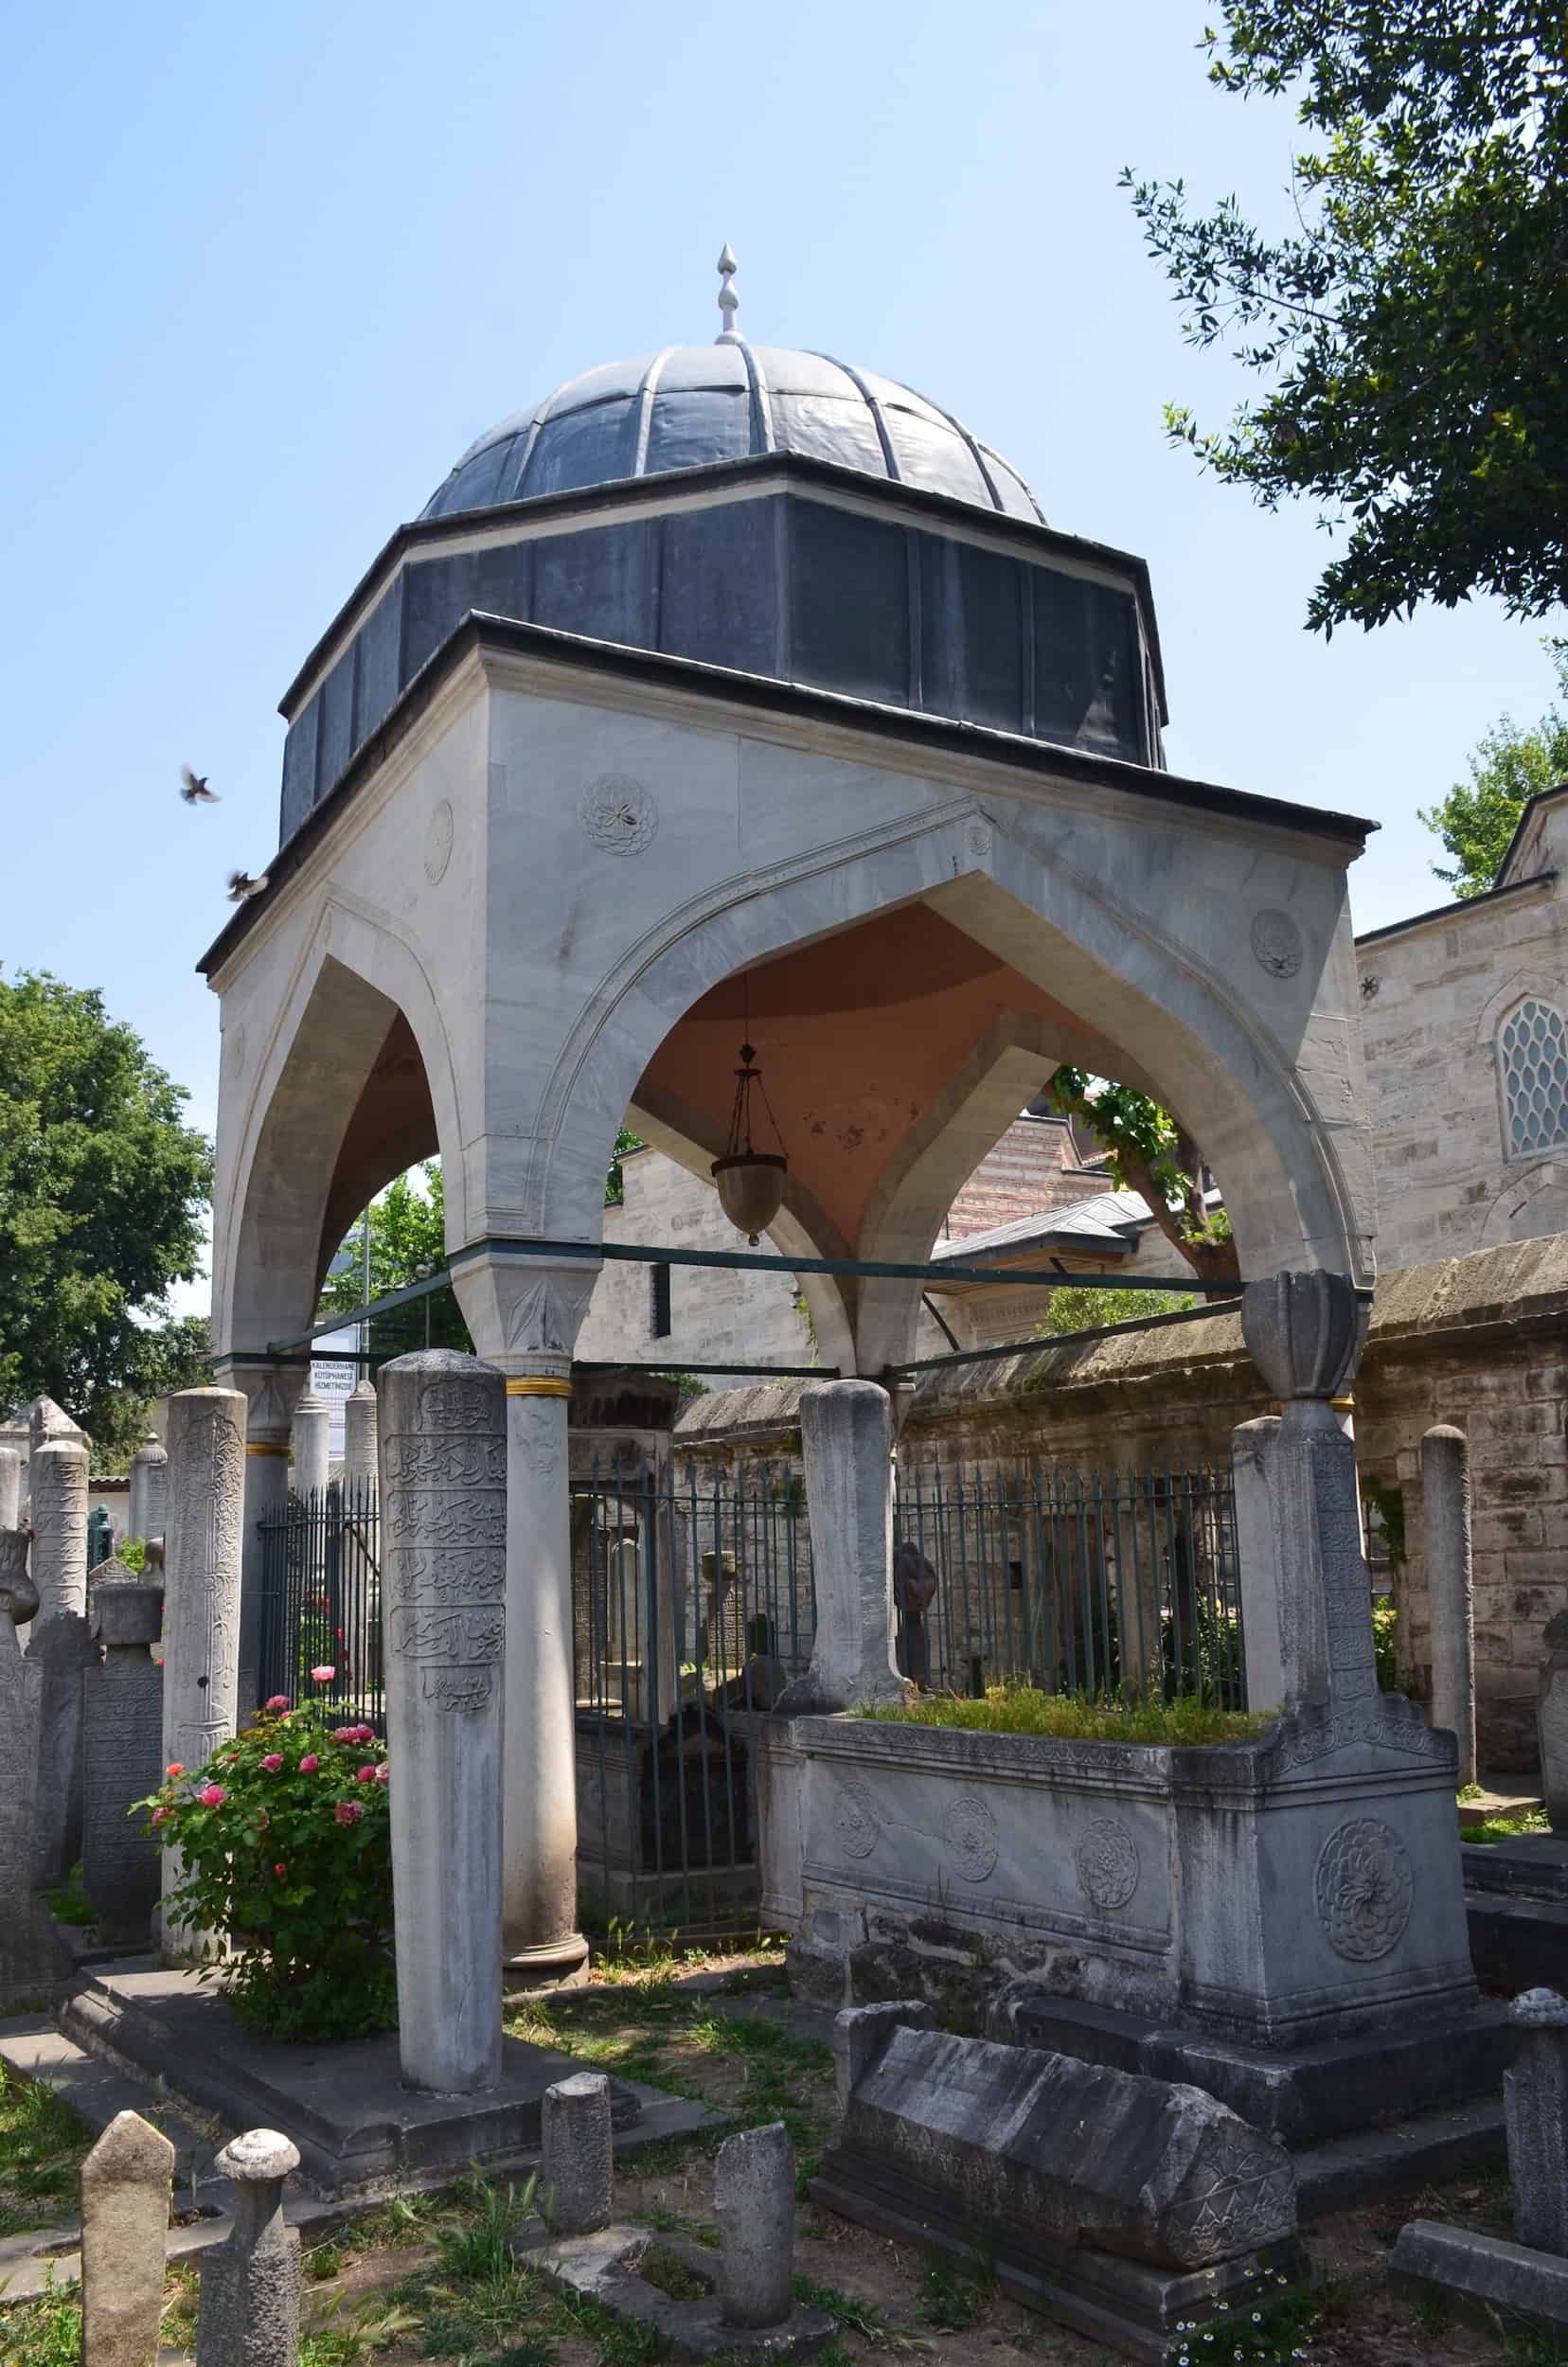 Tomb of Fatma Sultan at the Şehzade Mosque Complex in Istanbul, Turkey